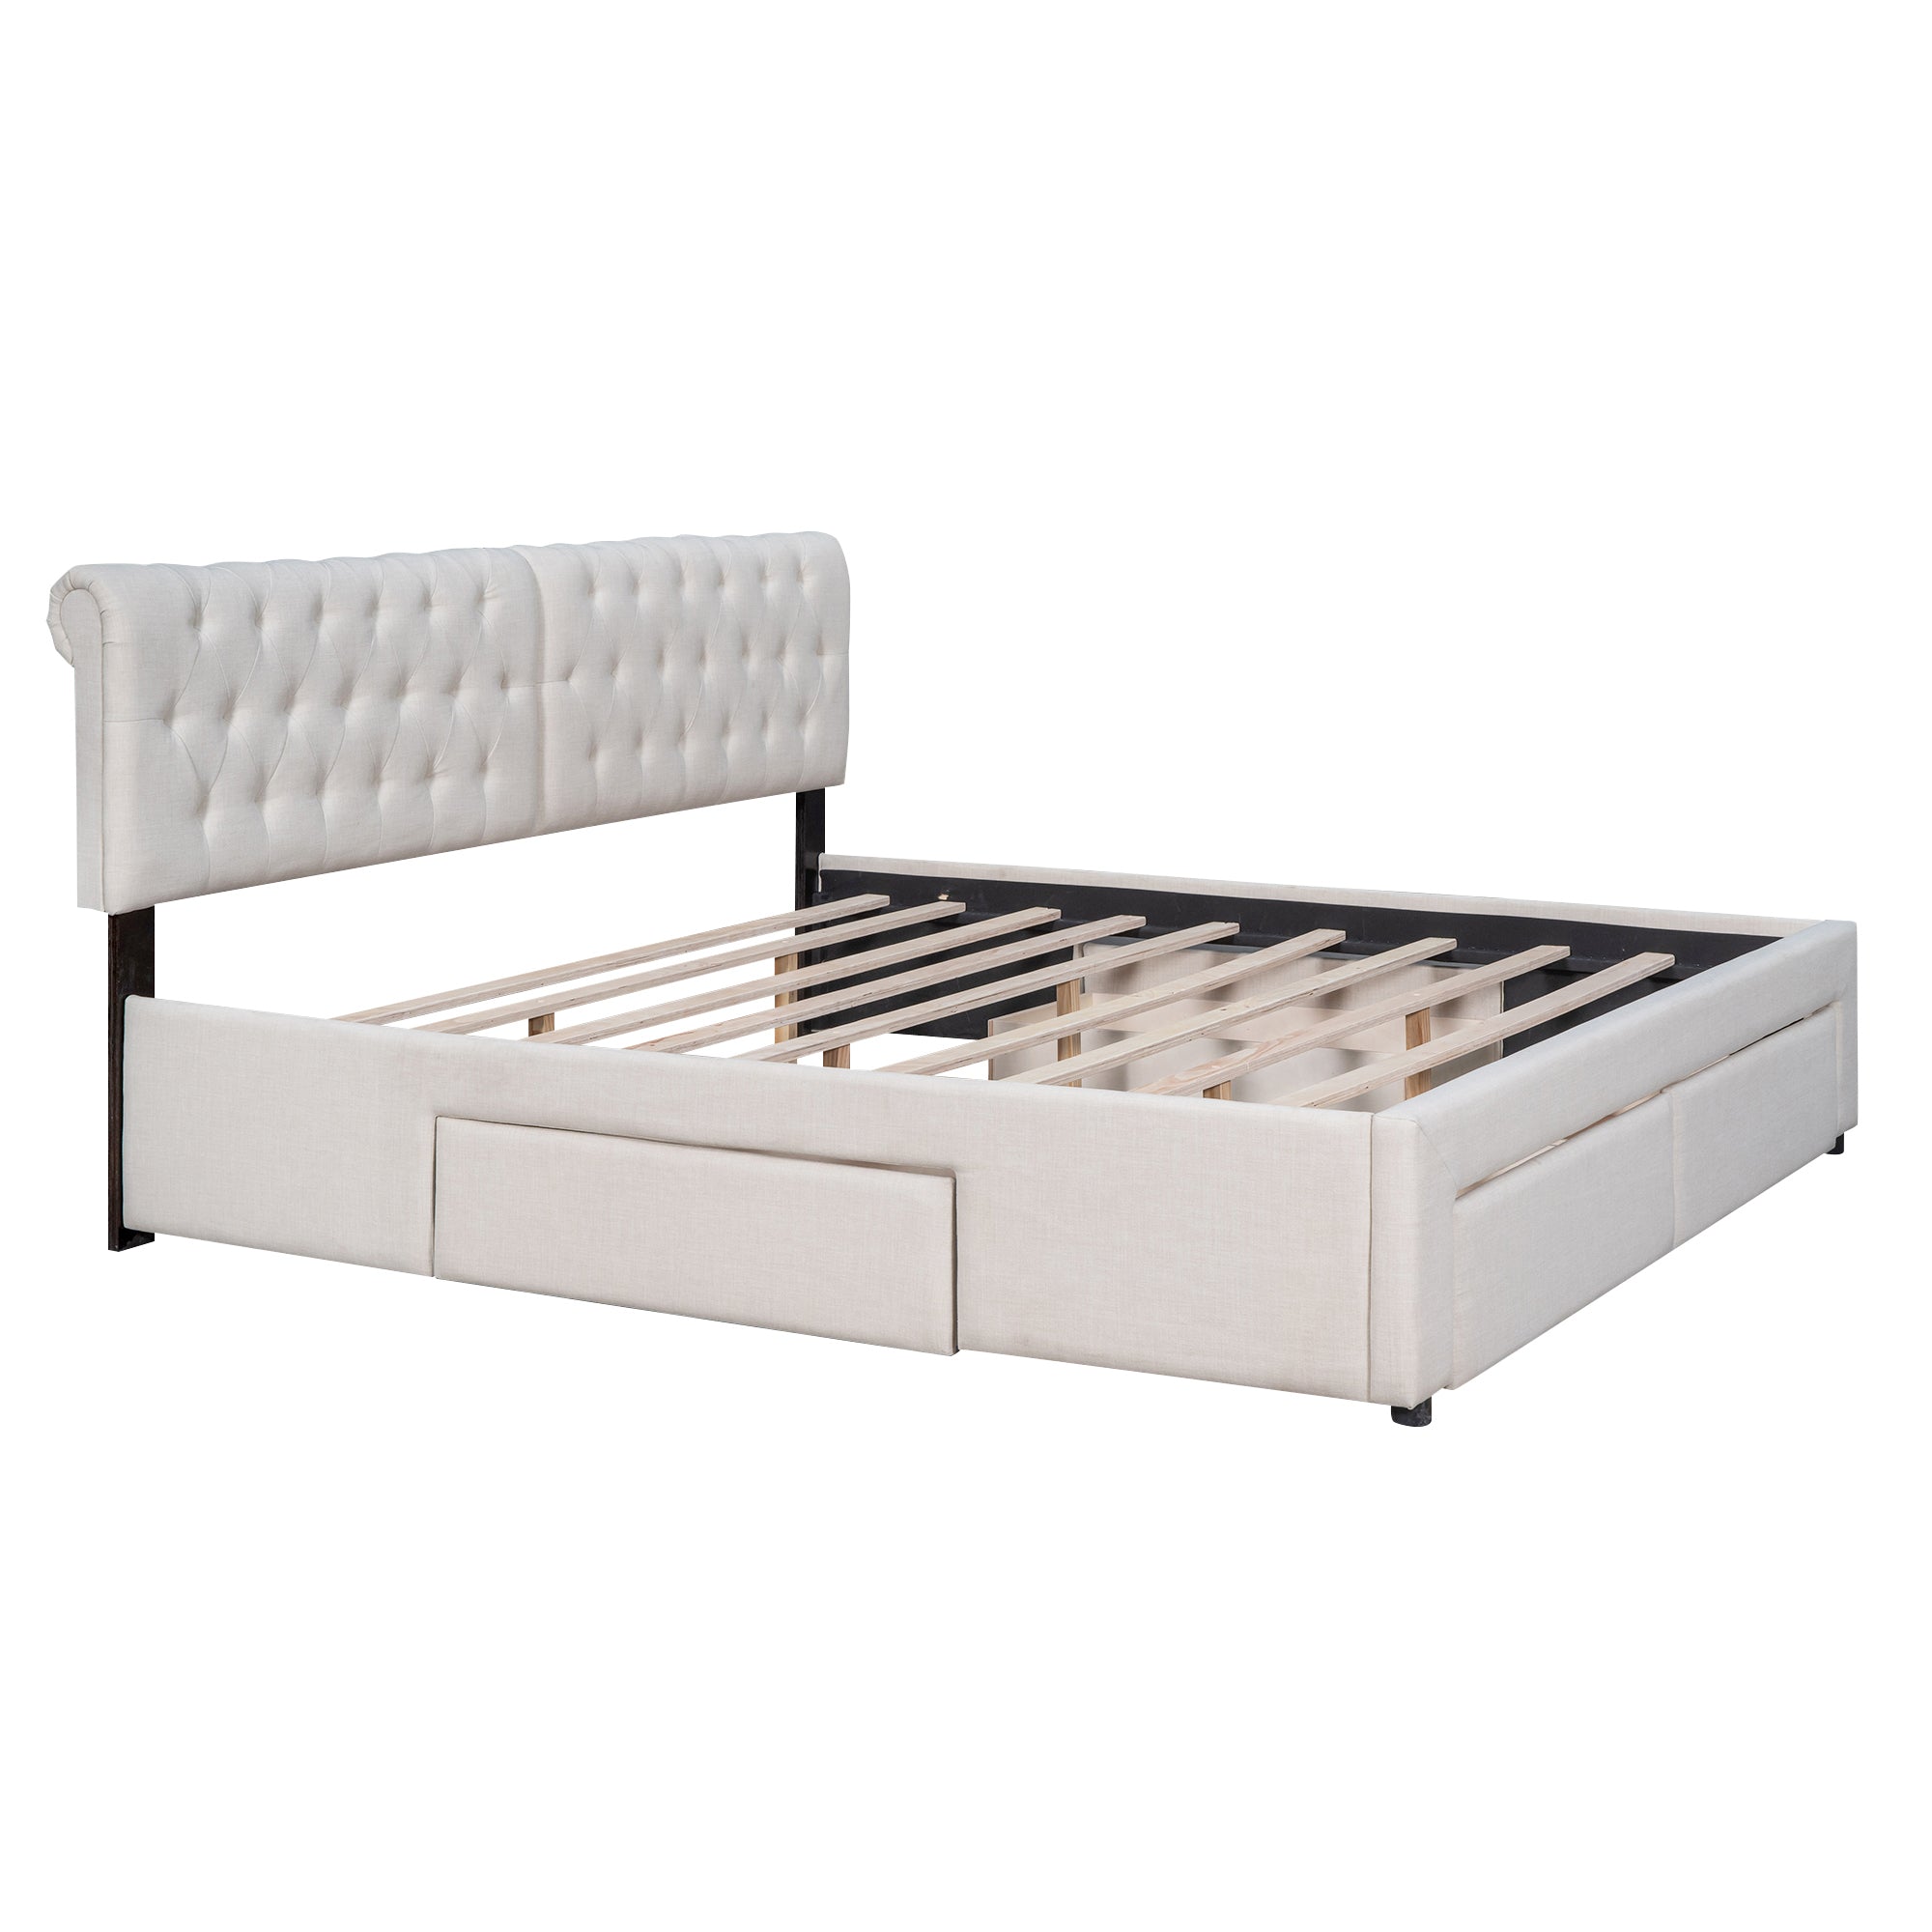 King Size Upholstery Platform Bed with Four Drawers - Beige